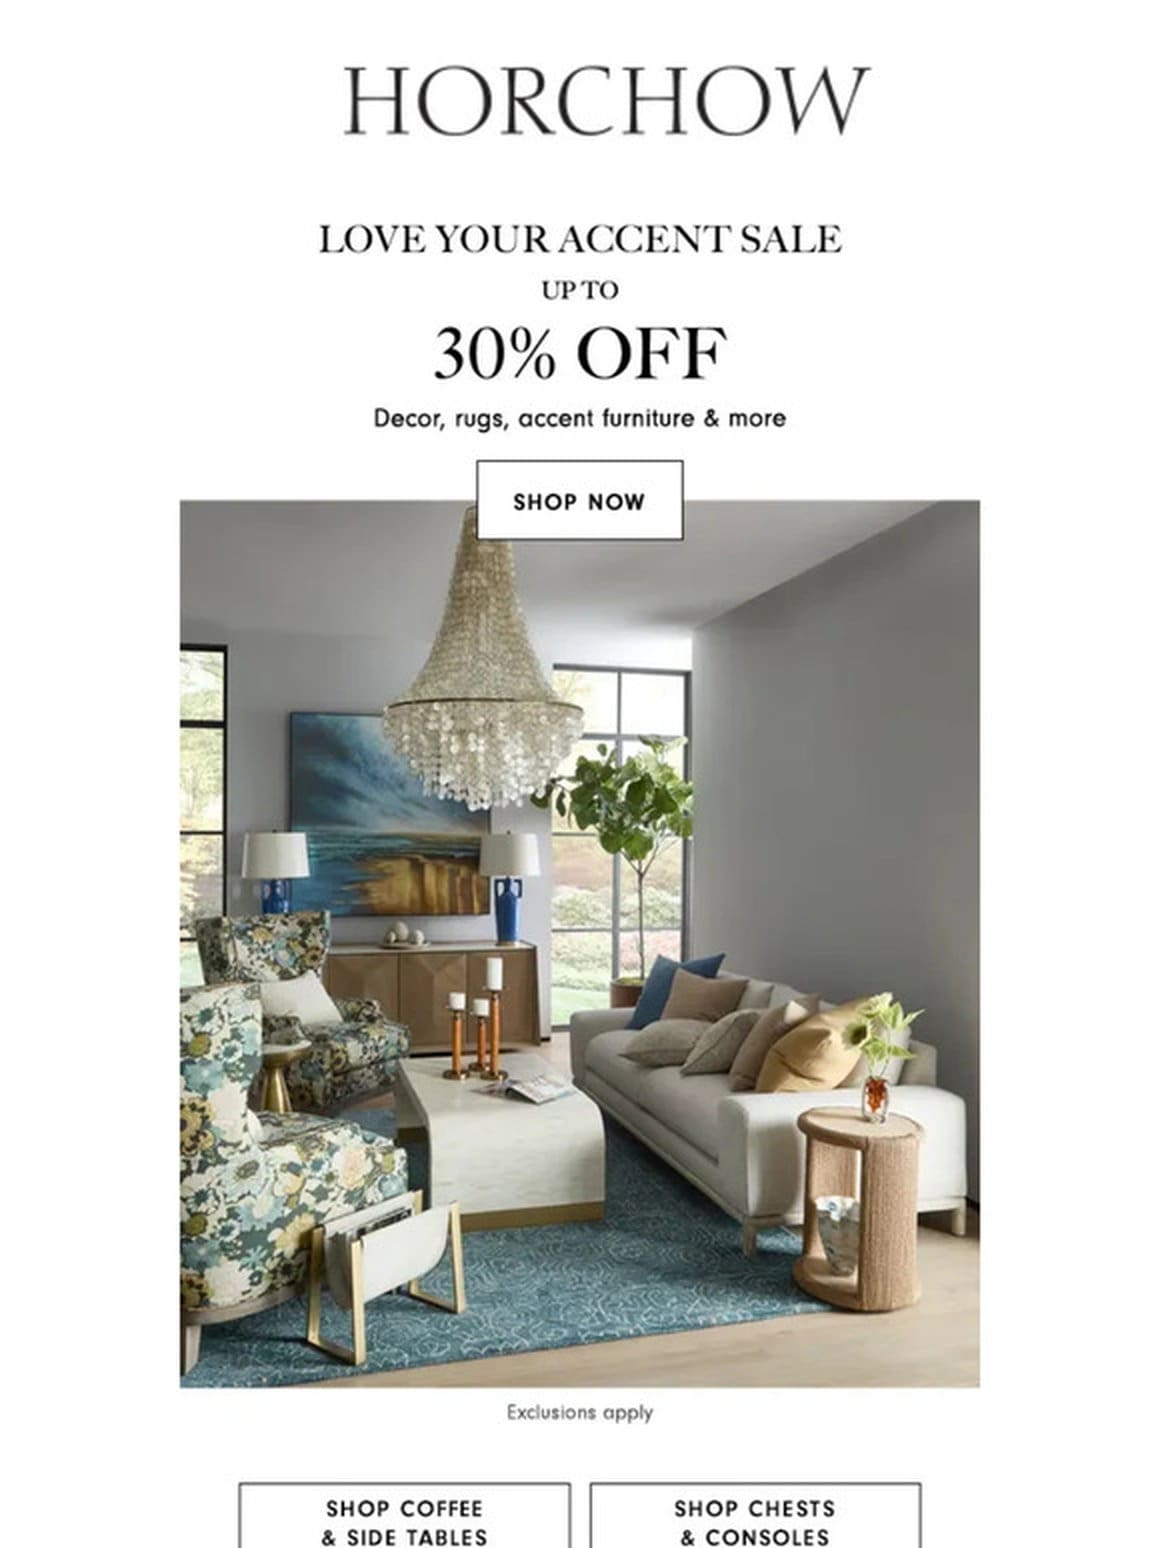 Time for a refresh: Save up to 30% on rugs， decor & more